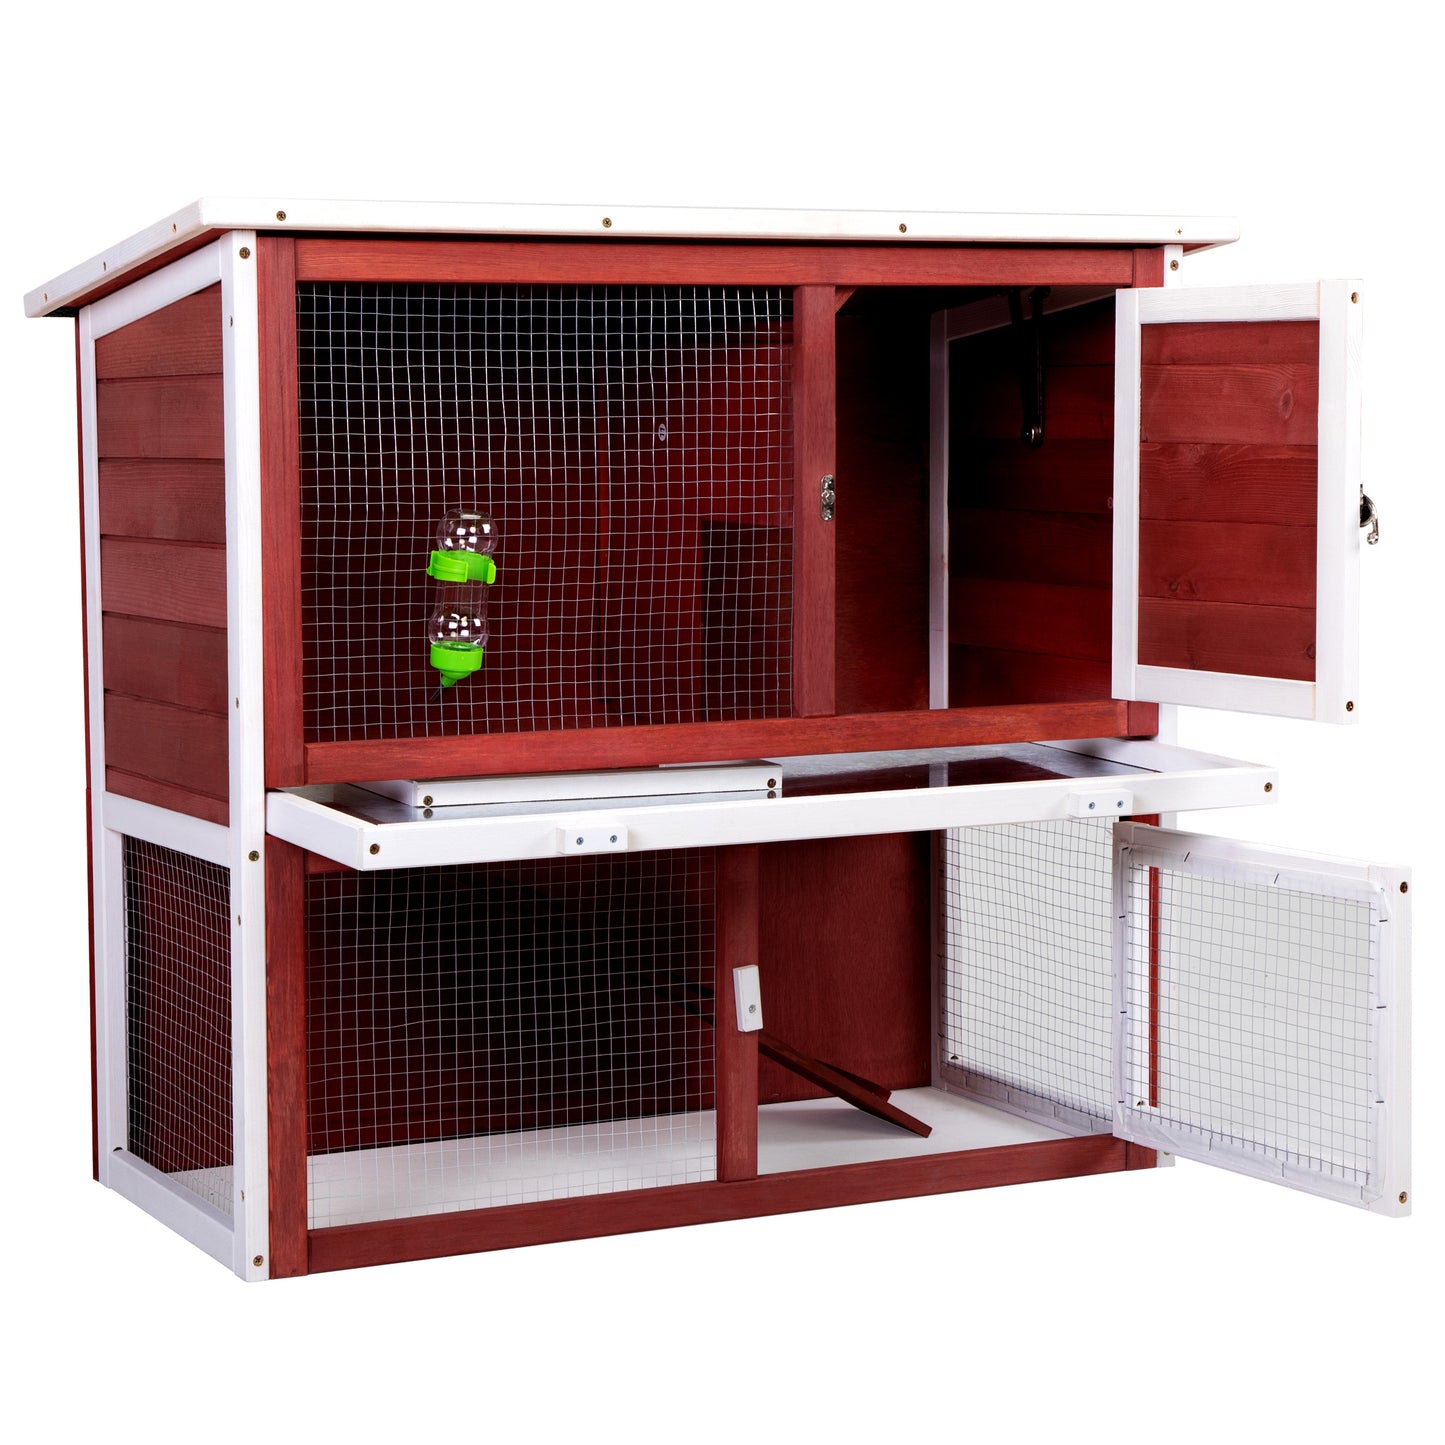 Wooden Rabbit Hutch with Pull Out Tray, Weatherproof 2-Tier Bunny Run Cage, Outdoor Animal Enclosure for Multiple Pets